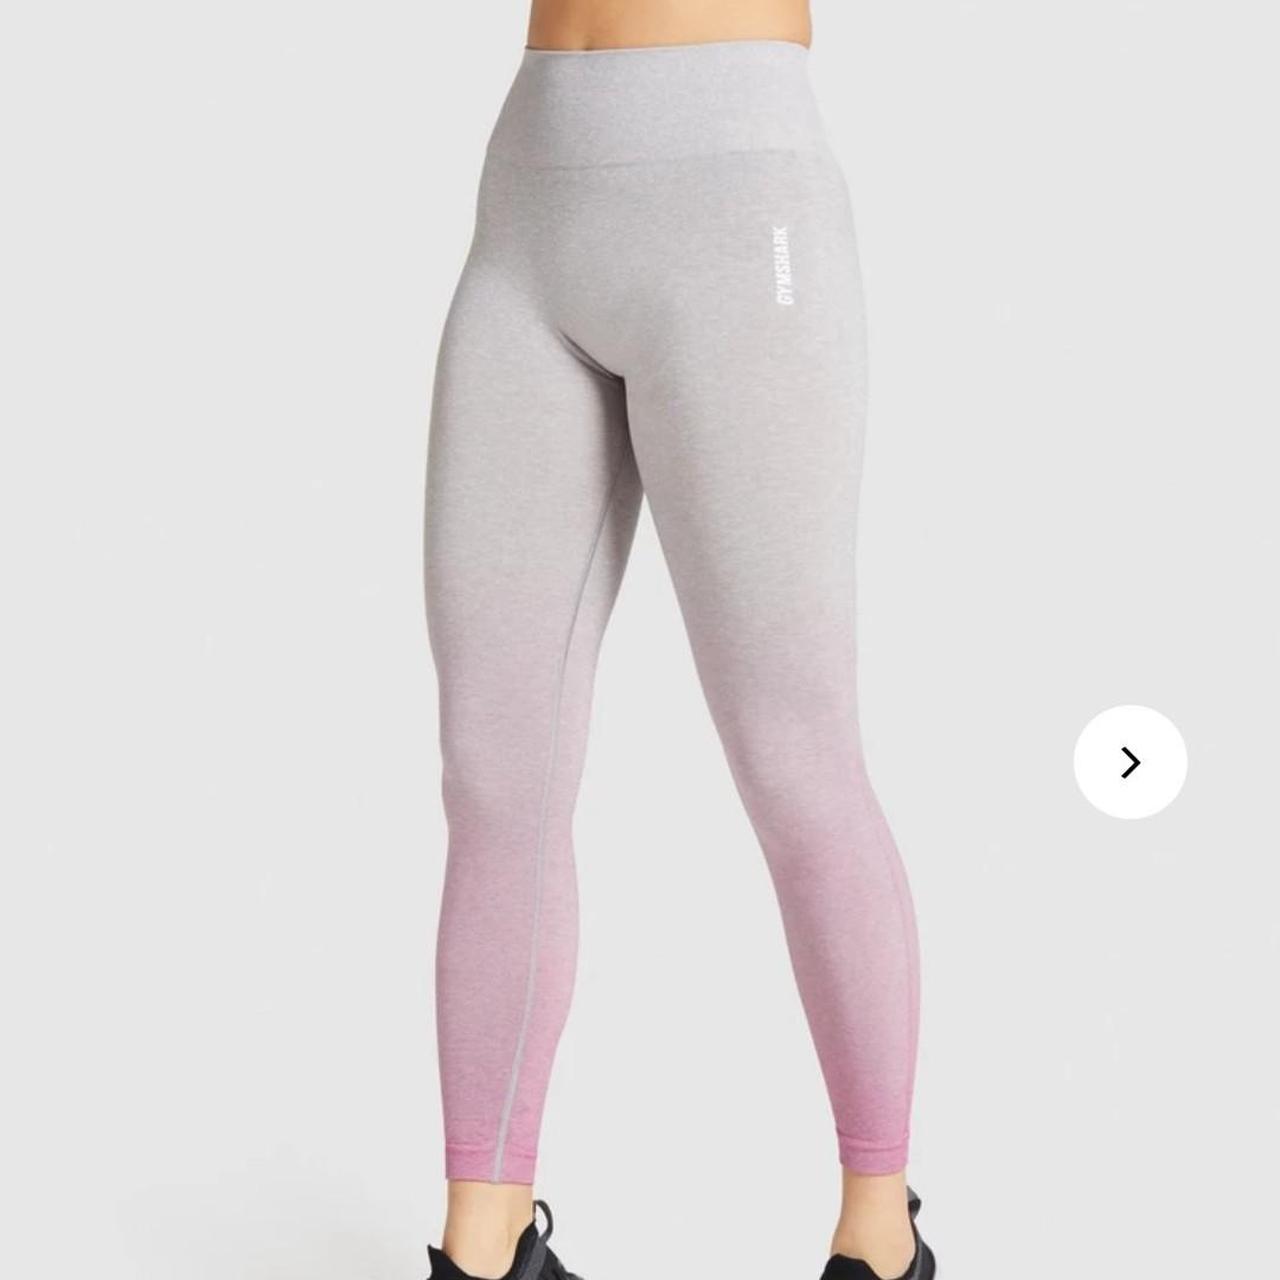 Ombré pink and grey Gym Shark leggings in size XS, - Depop